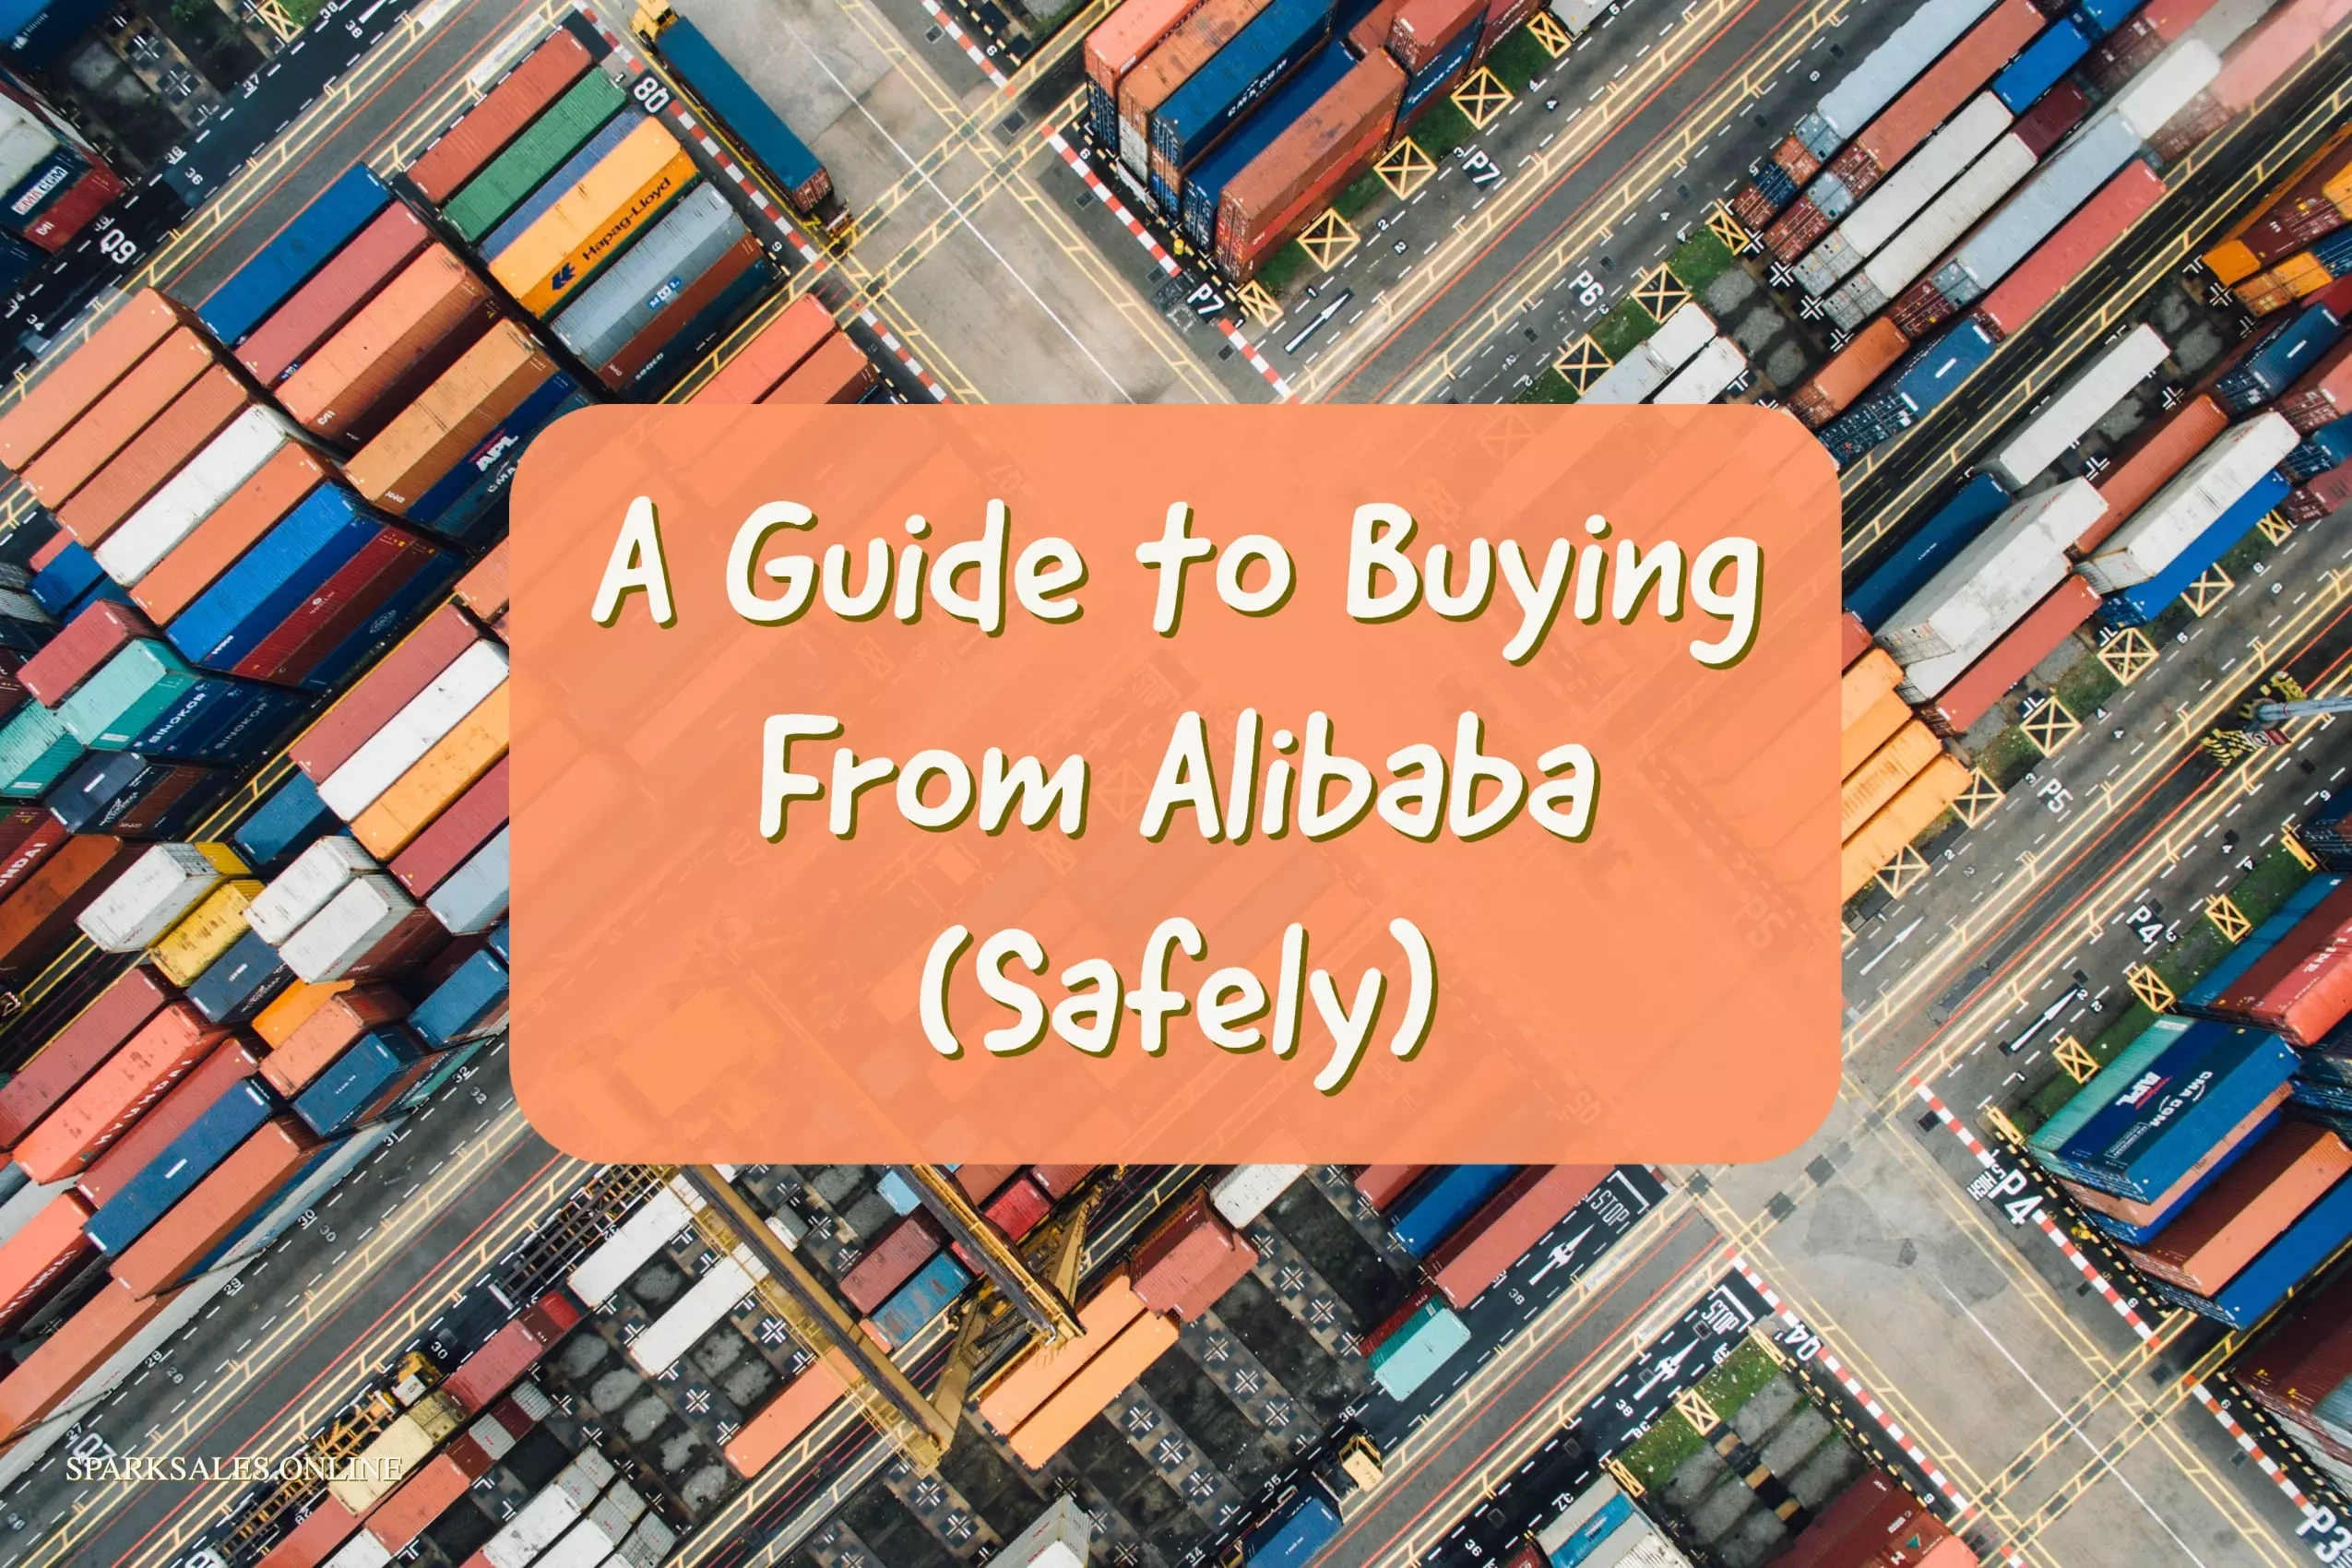 A Guide to Buying From Alibaba (Safely)